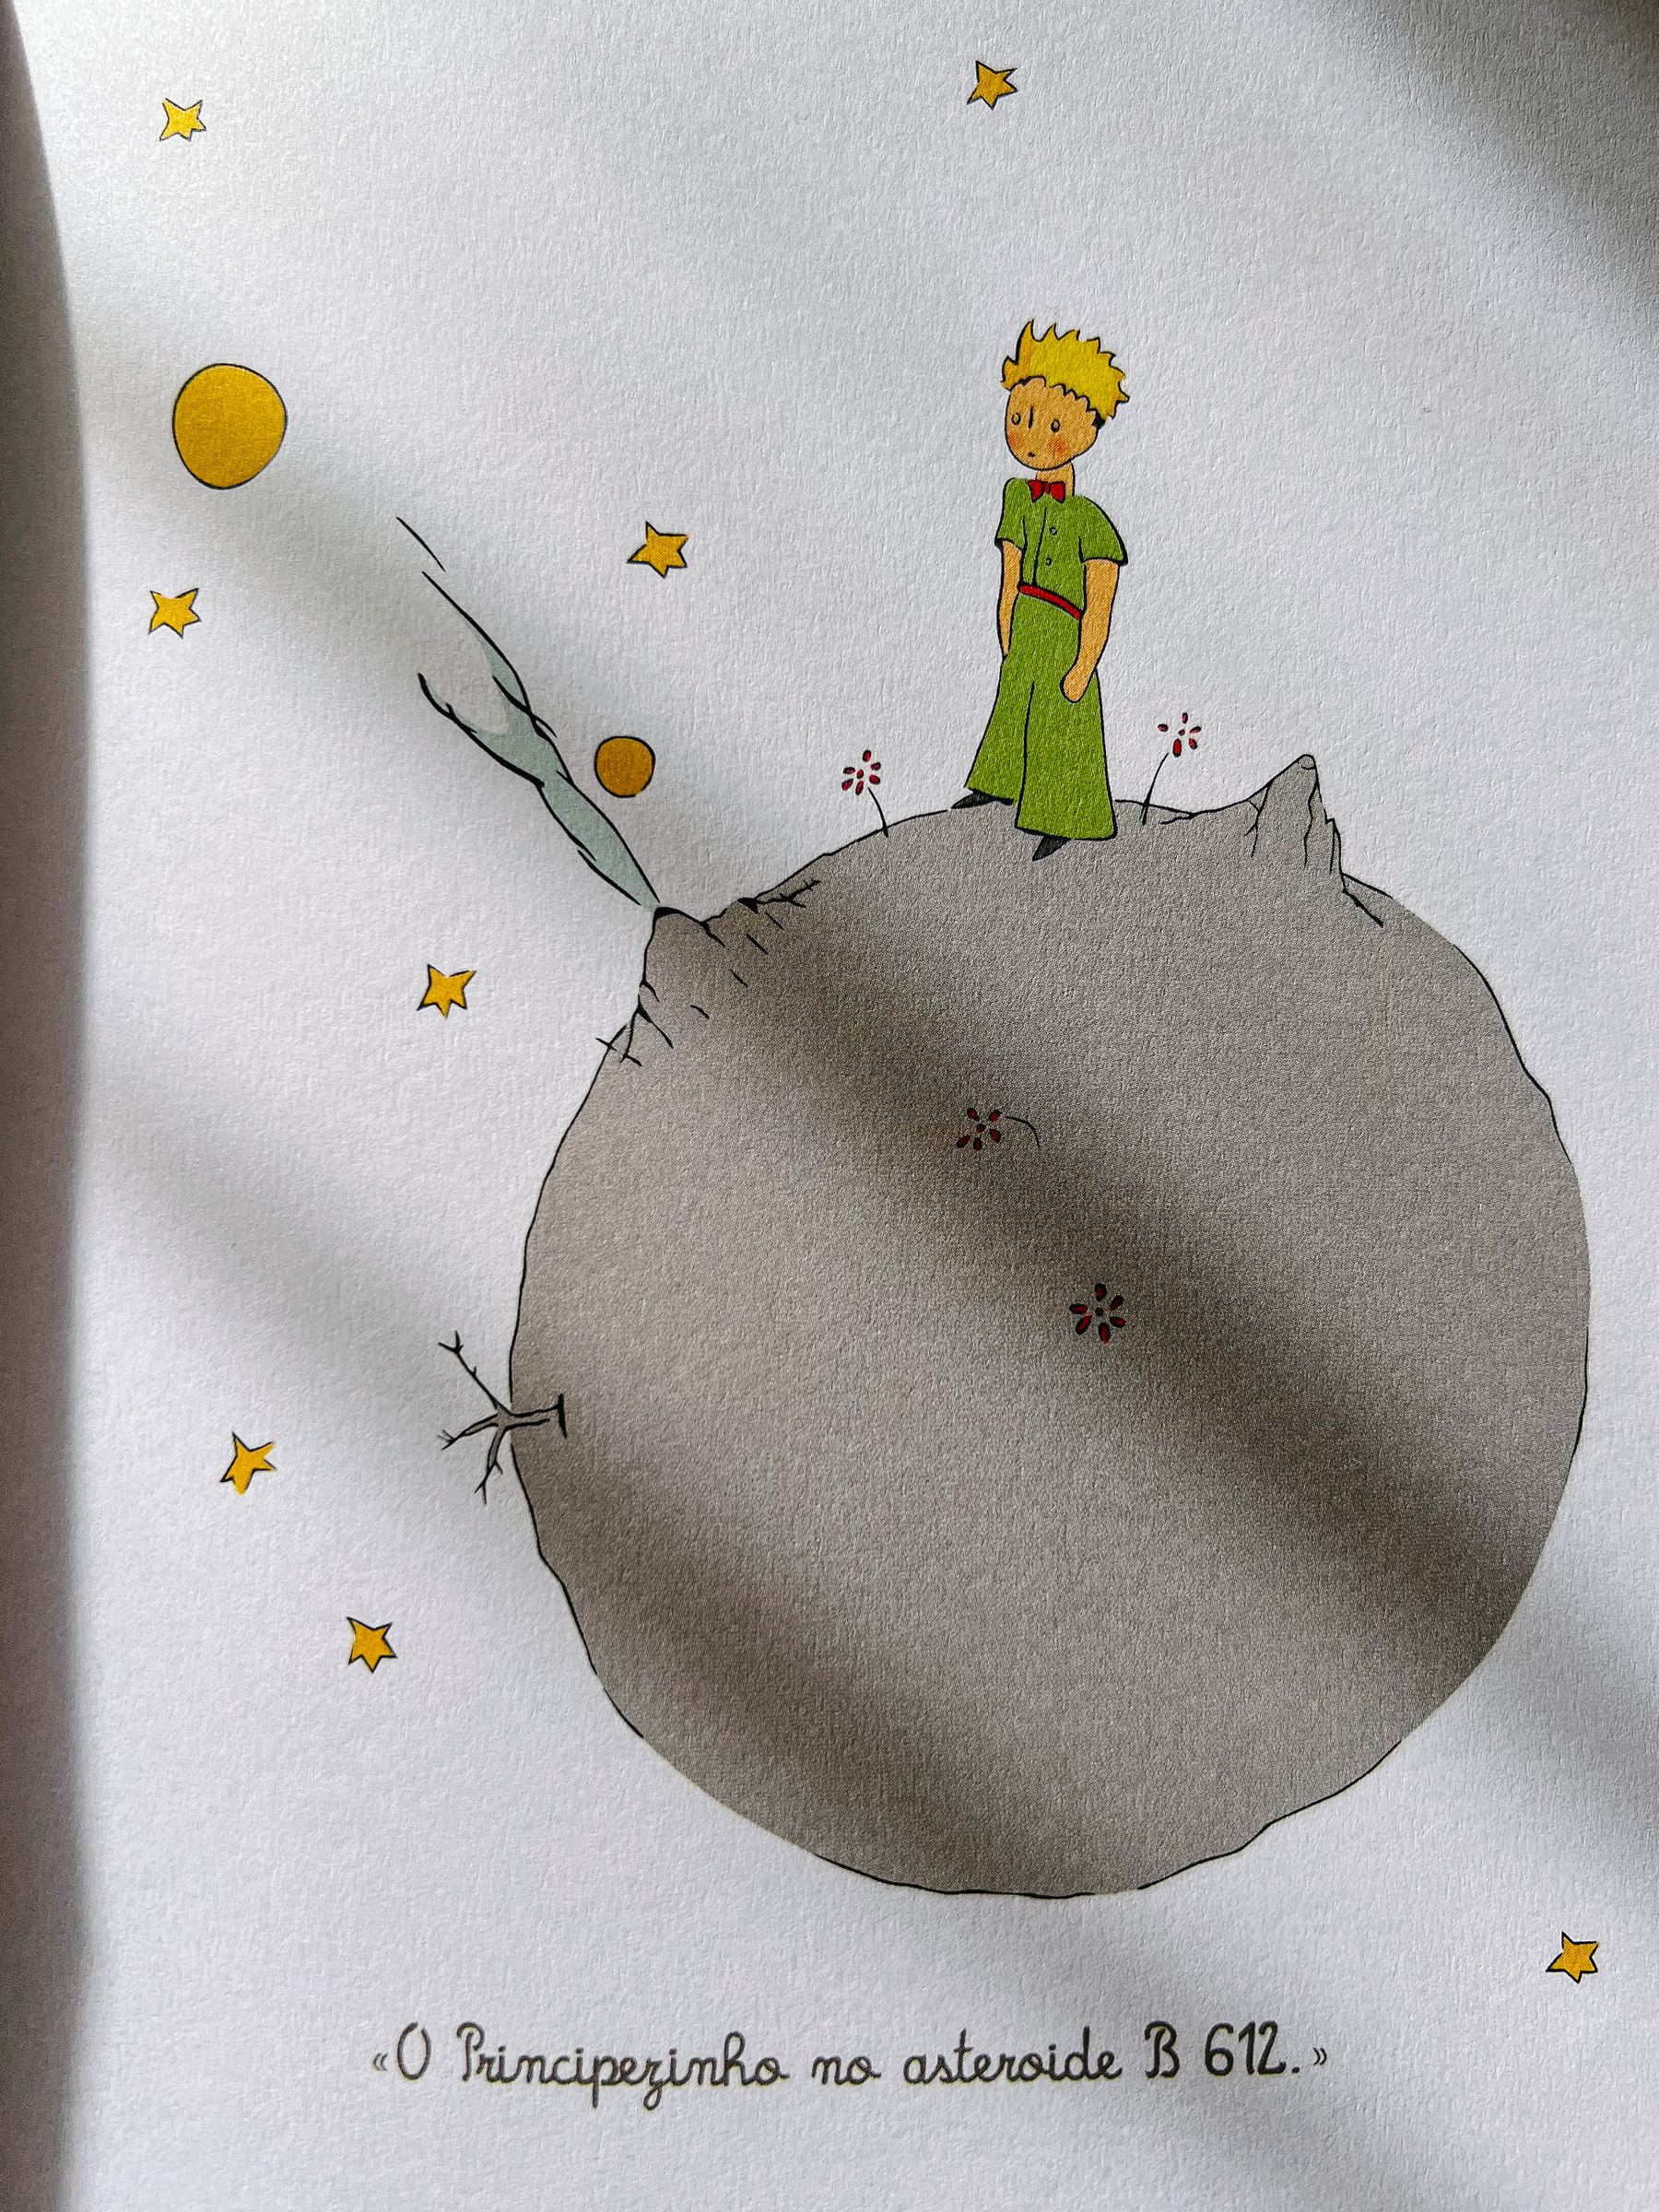 A book page, with an illustration of the Little Prince, on asteroid B 612. 